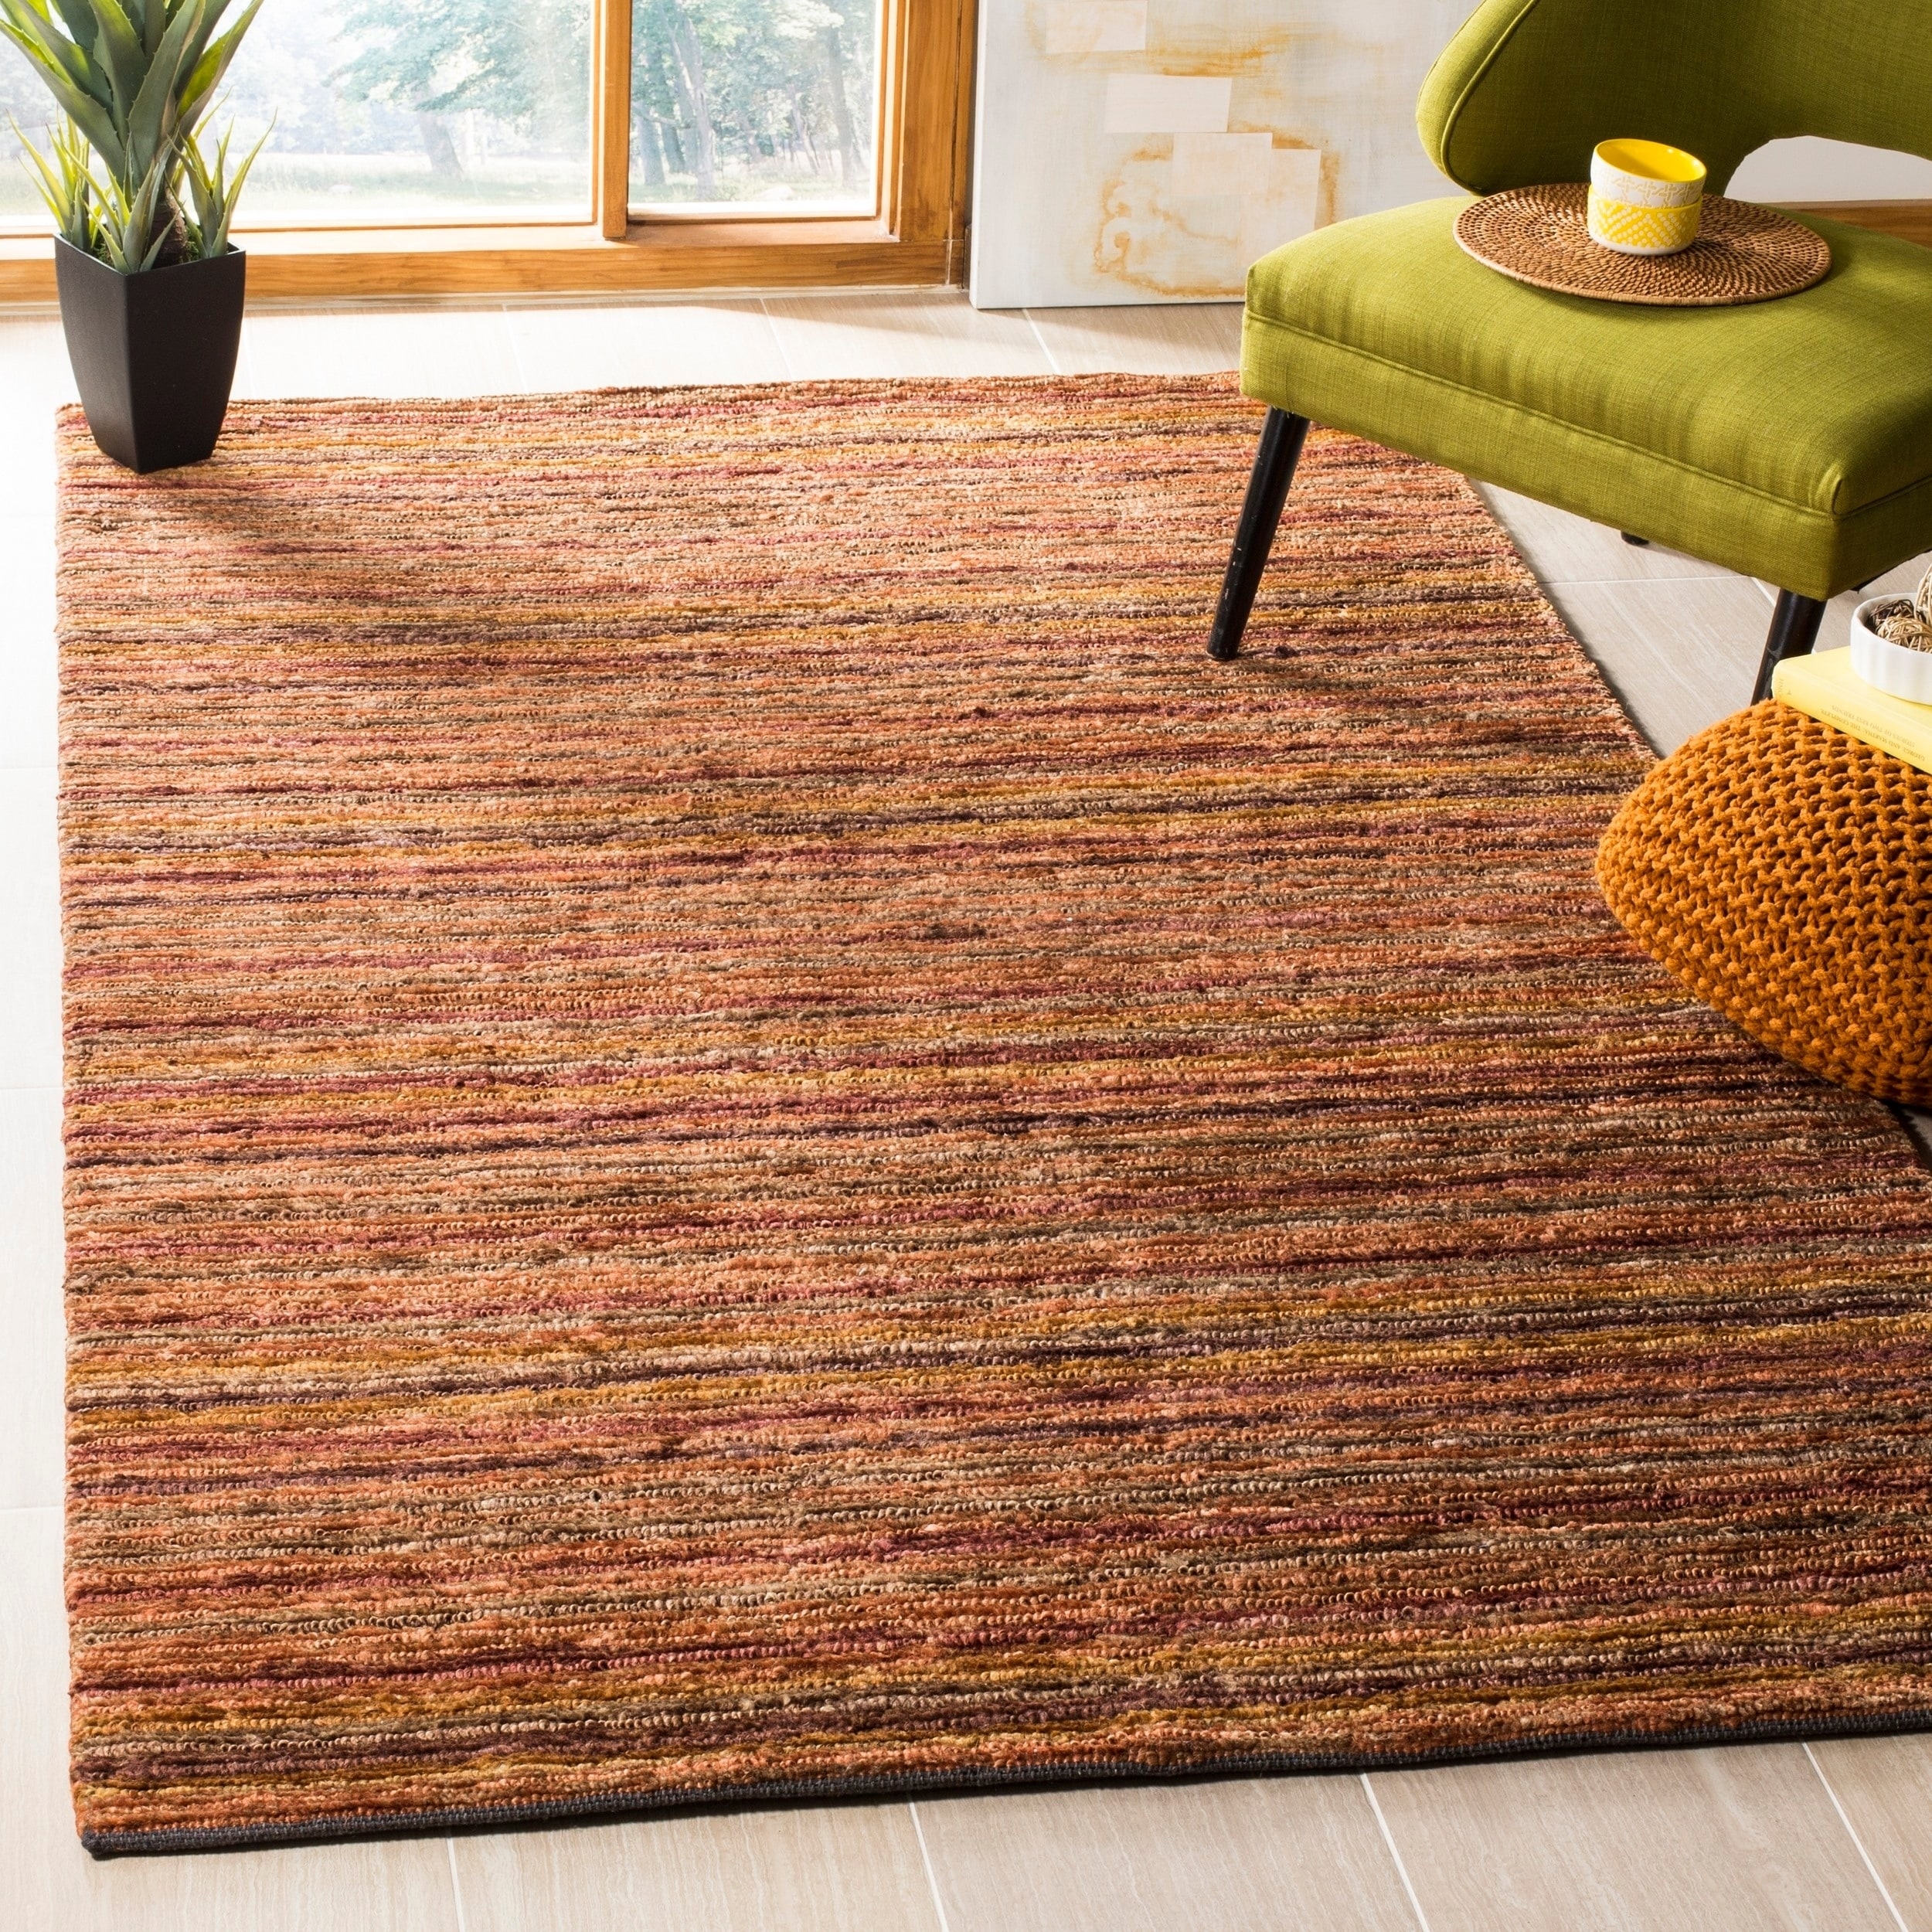 Shop Safavieh Hand-knotted All-Natural Striped Red/ Multi Rug - 8' X 10 - Does Natural Grocers Have Black Friday Deals